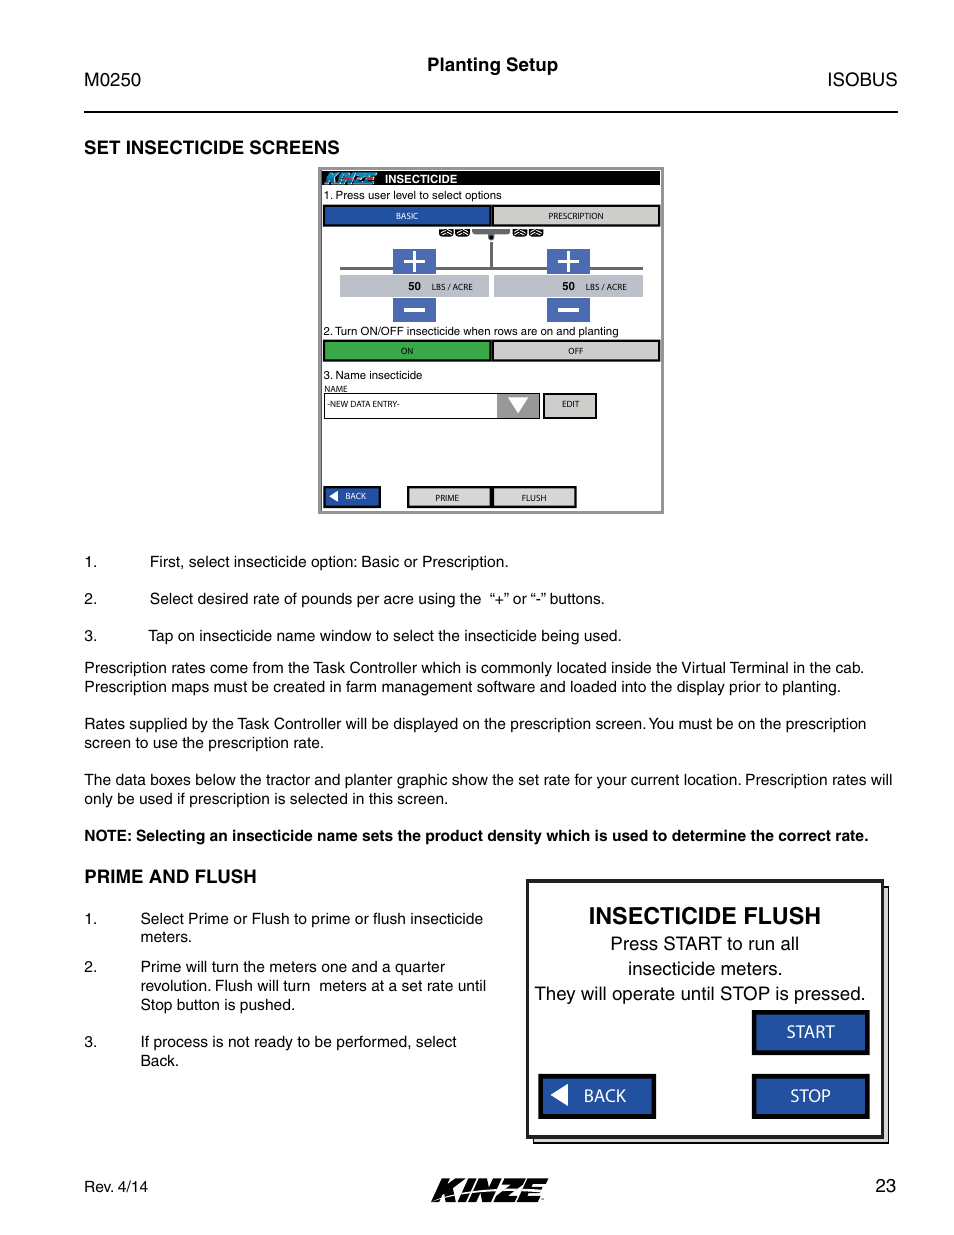 Set insecticide screens, Prime and flush, Set insecticide screens prime and flush | Insecticide flush, Isobus m0250, Back stop start set insecticide screens | Kinze ISOBUS Electronics Package (4900) Rev. 4/14 User Manual | Page 27 / 60